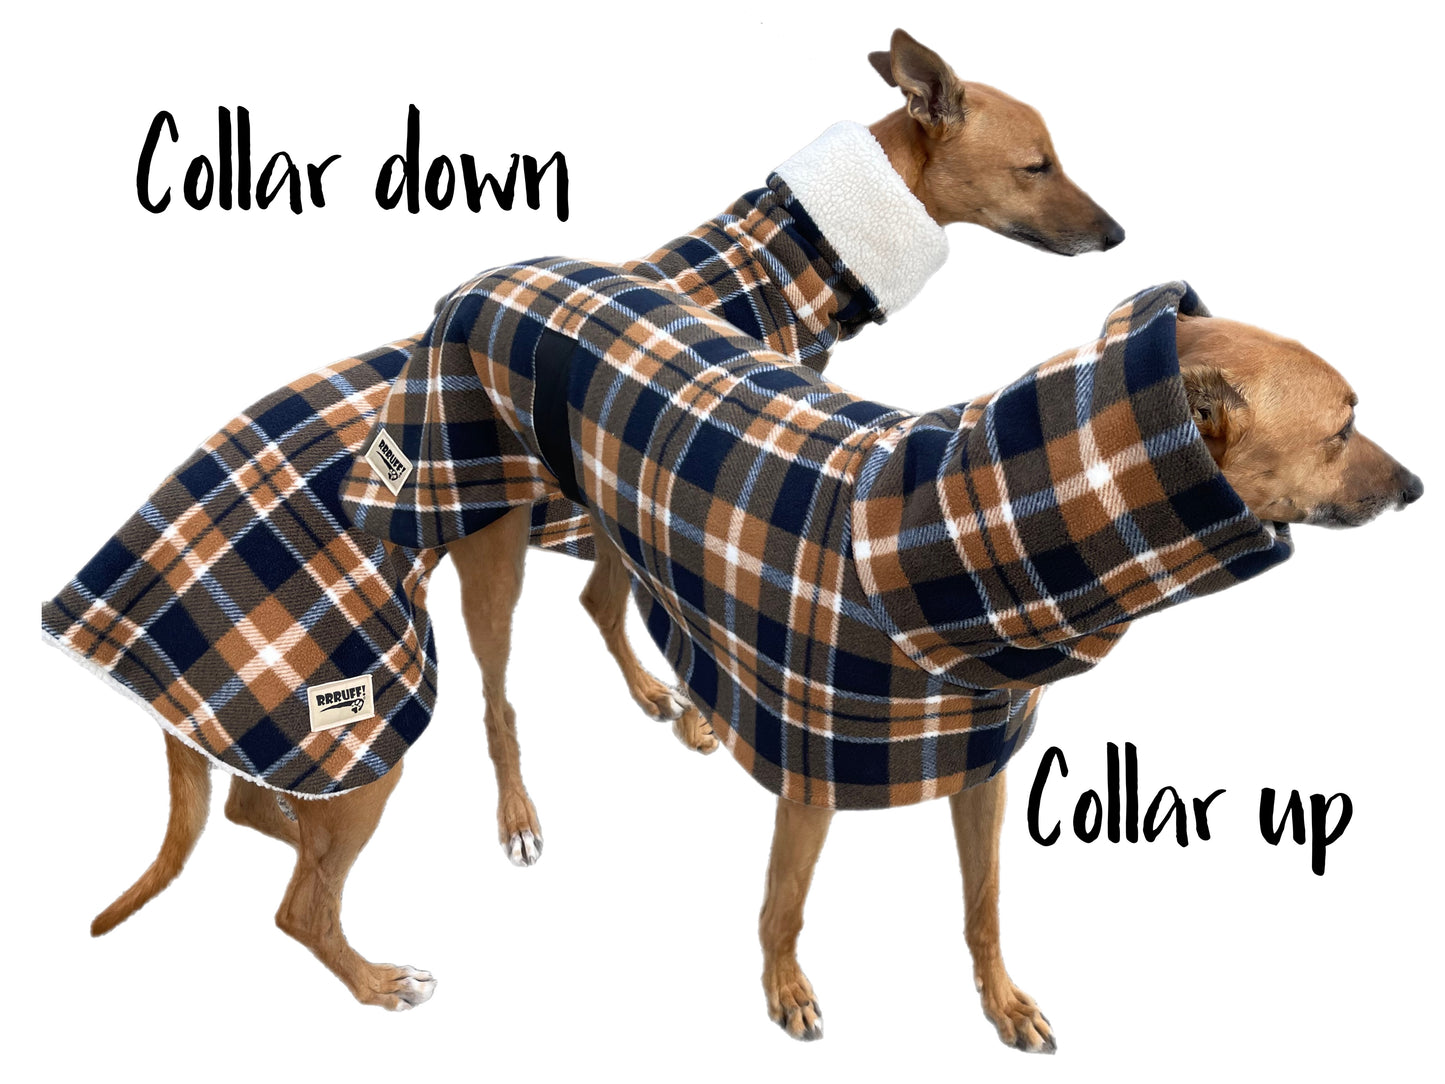 The caramel Lumberjack Greyhound coat in deluxe style rug brown/navy flanno plaid check  polar fleece washable extra wide neck